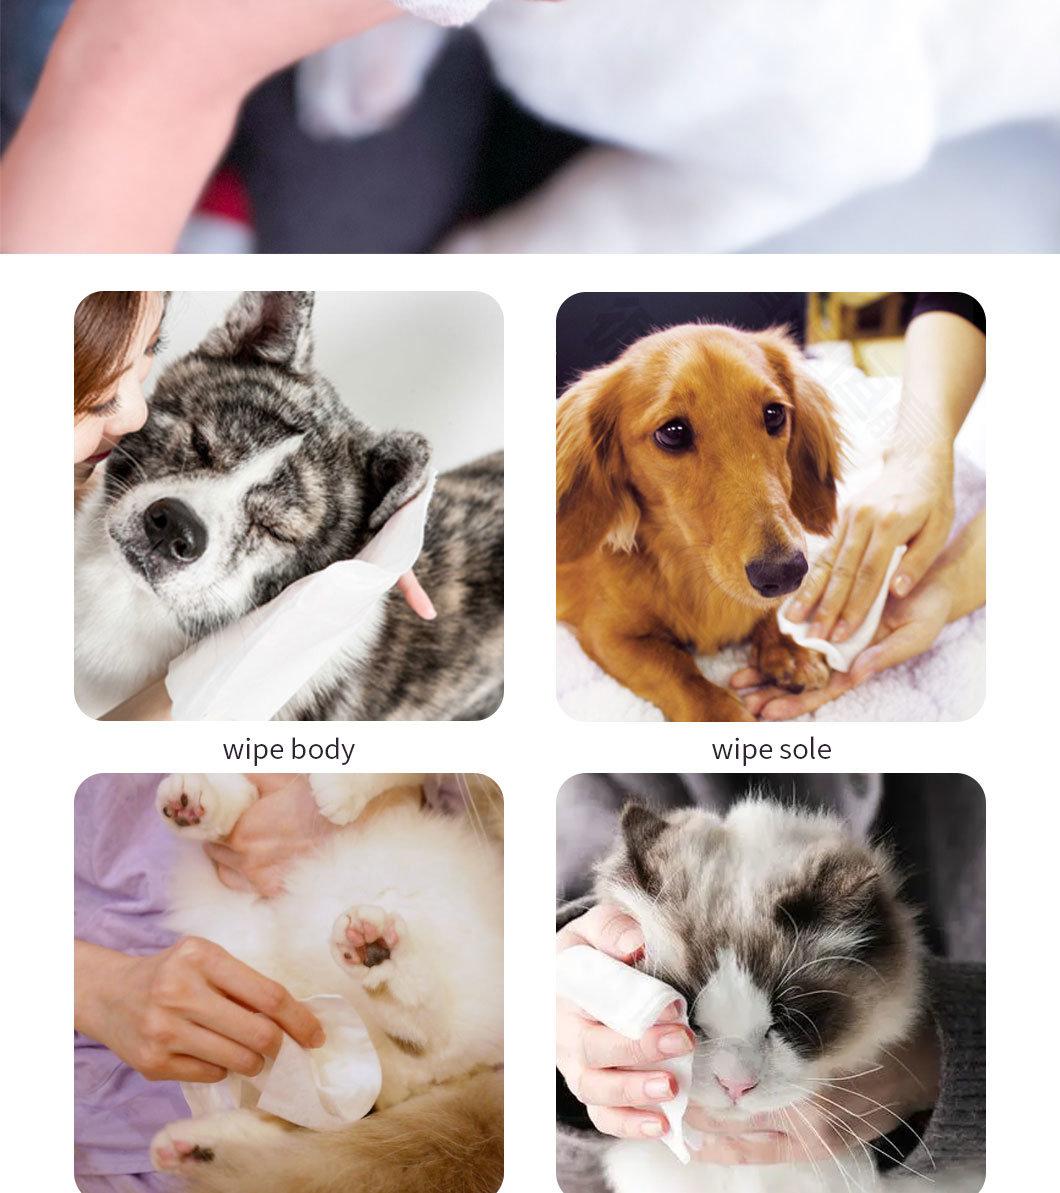 Pet Eye′ S Wipe and Nose Wipe Special for Pet Care, Mild Formula, No Irritating. Anti-Bacterial, Anti-Virus, to Keep Your Pet in Good Health